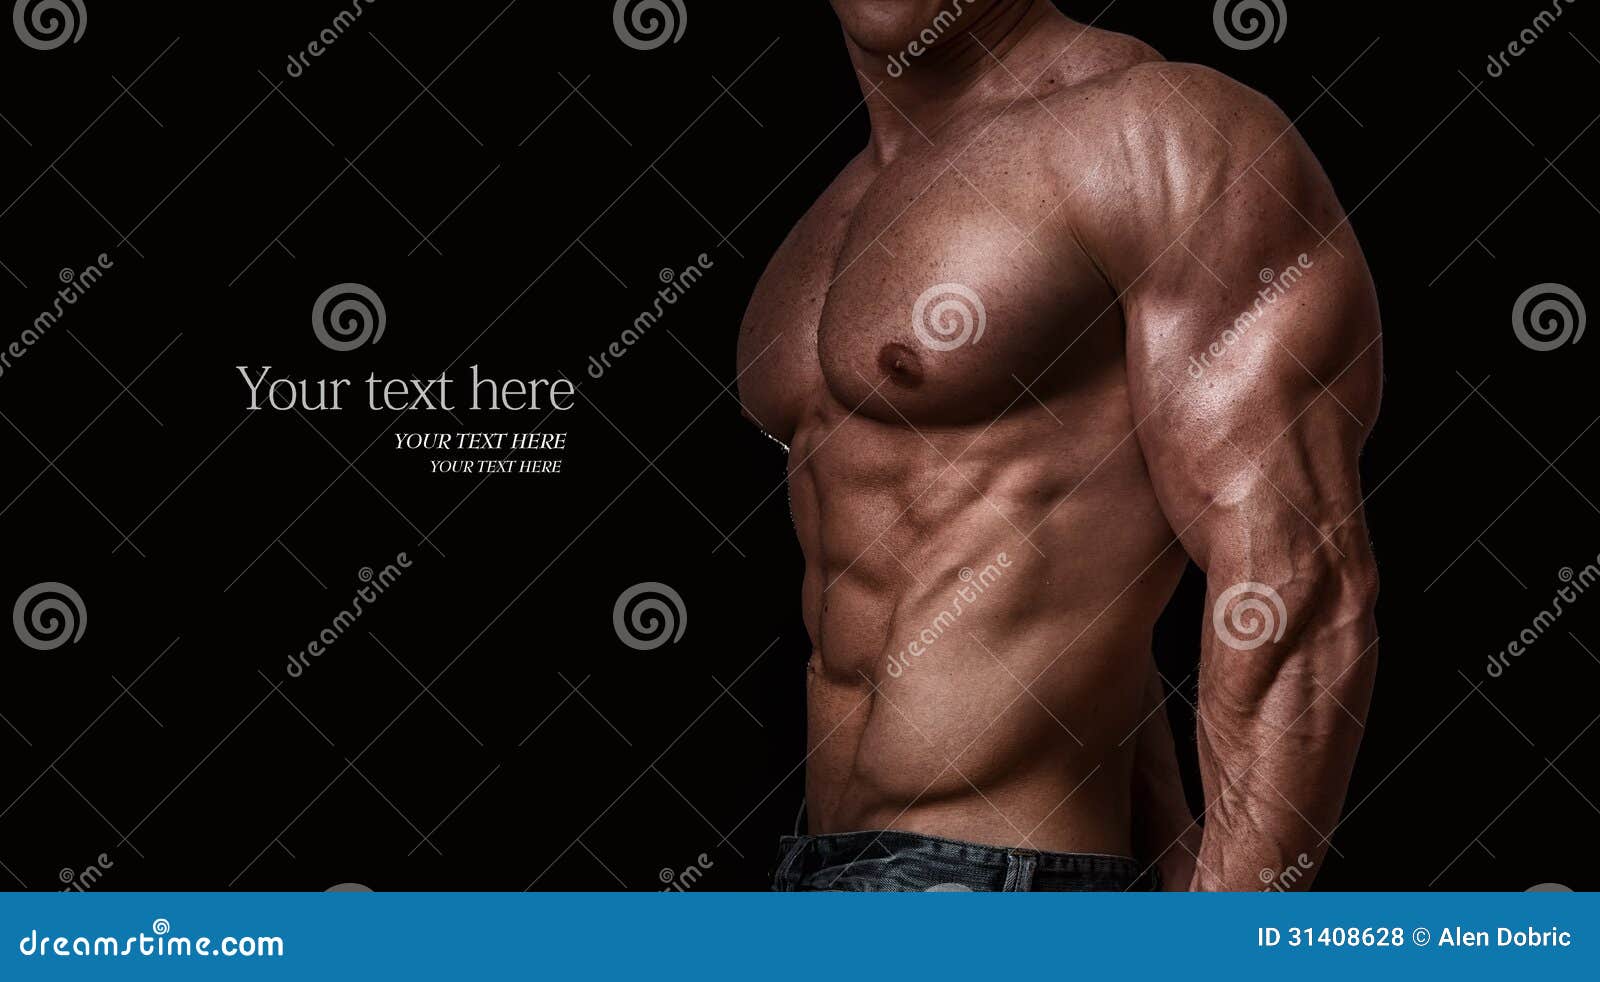 Black muscle guys hot girls 169 178 Bodybuilder Photos Free Royalty Free Stock Photos From Dreamstime